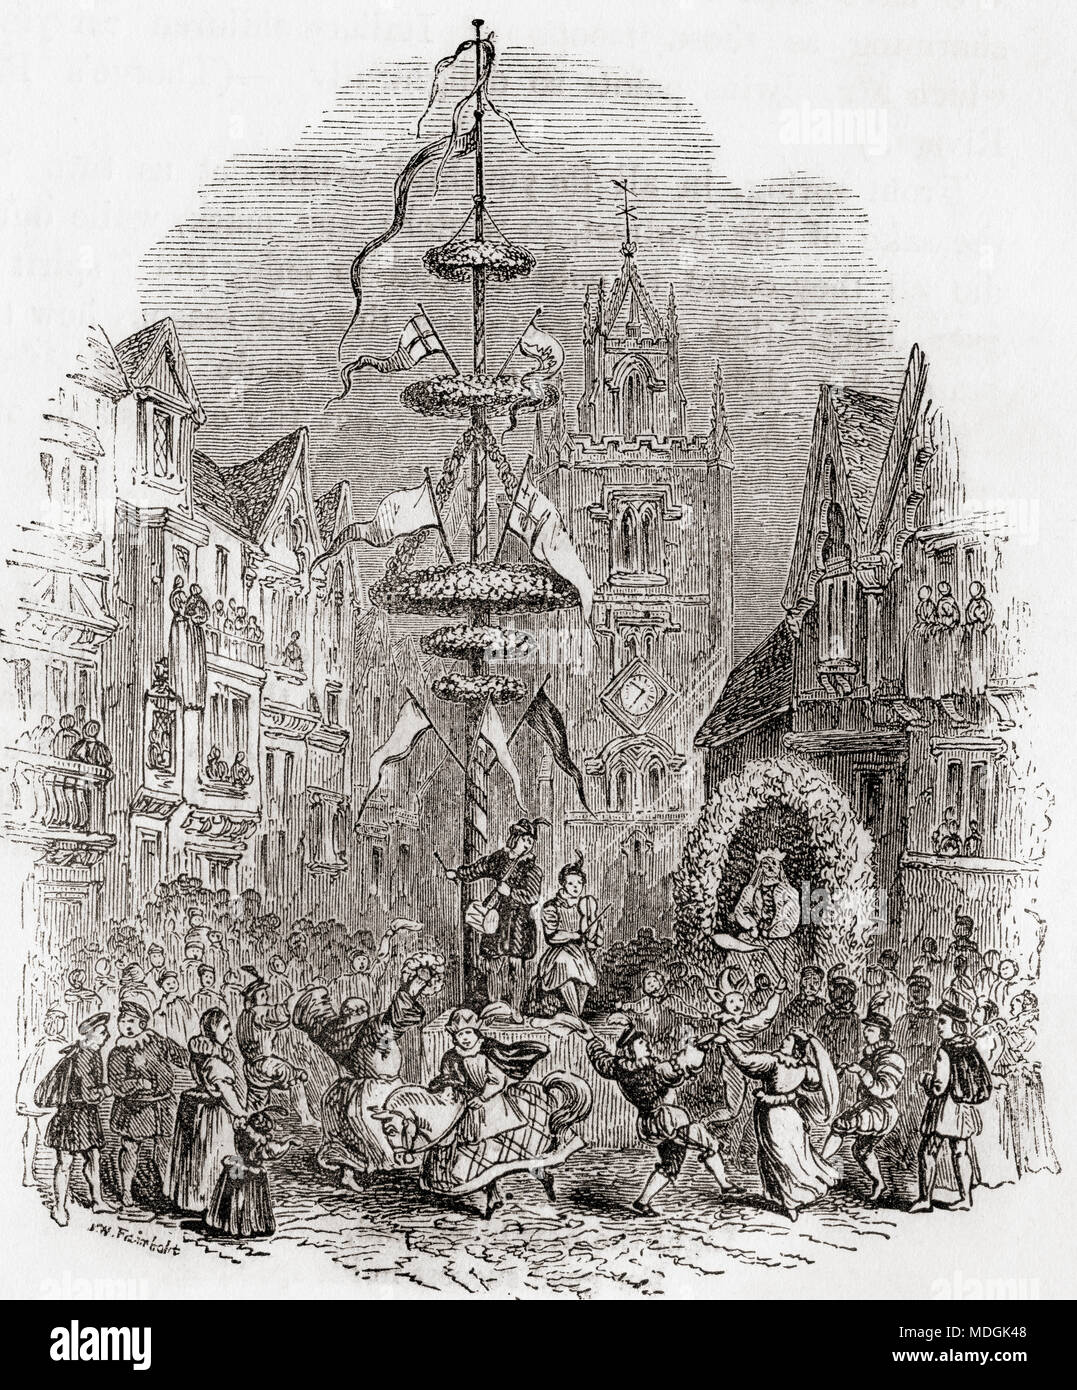 Maypole dancing in front of St Andrew Undershaft Church, London, England in the 19th century. From Old England: A Pictorial Museum, published 1847. Stock Photo